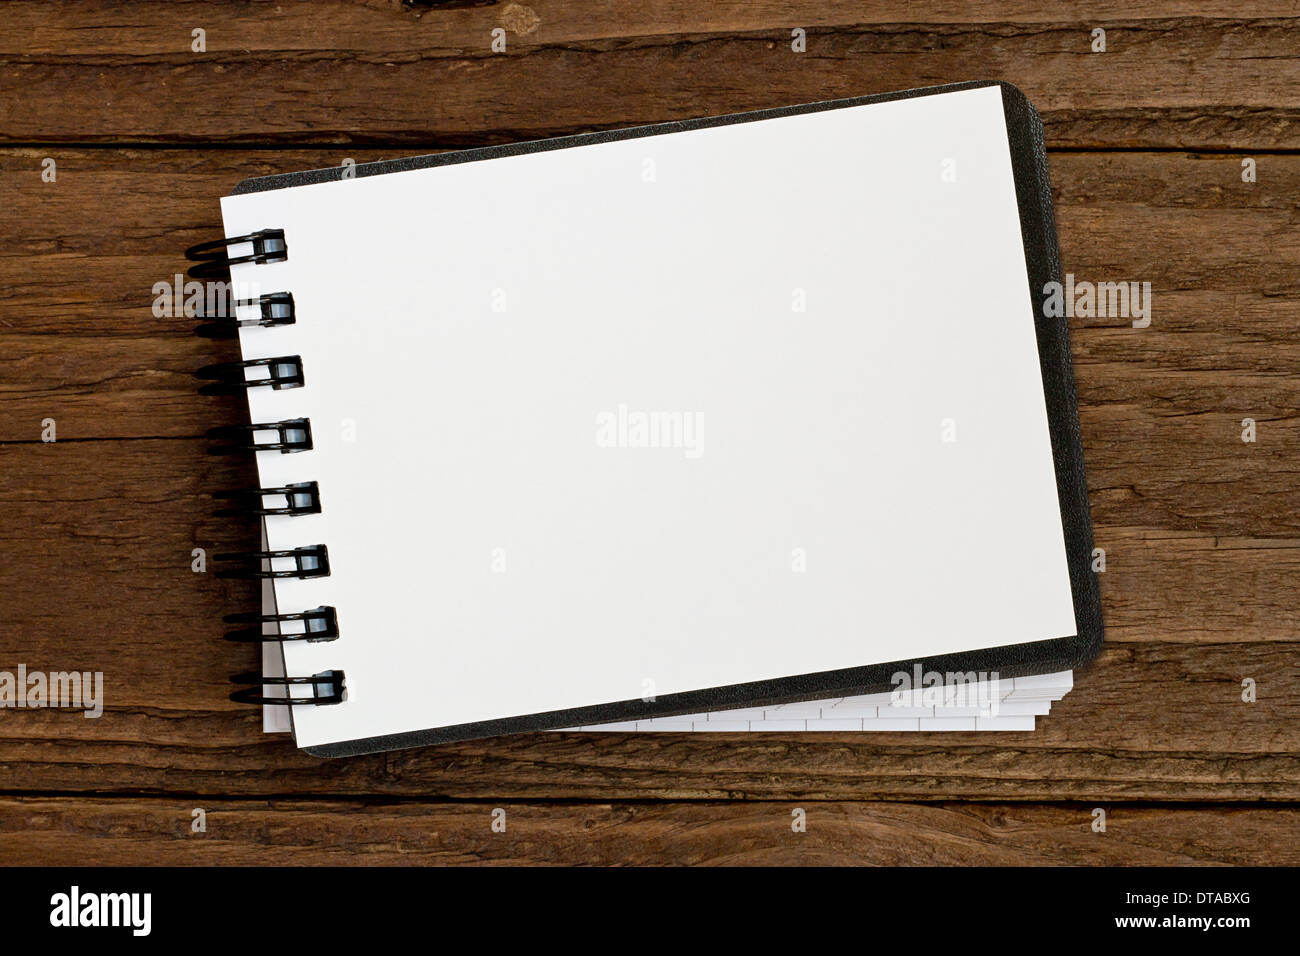 Small blank notepad in landscape orientation against a rustic wooden background Stock Photo